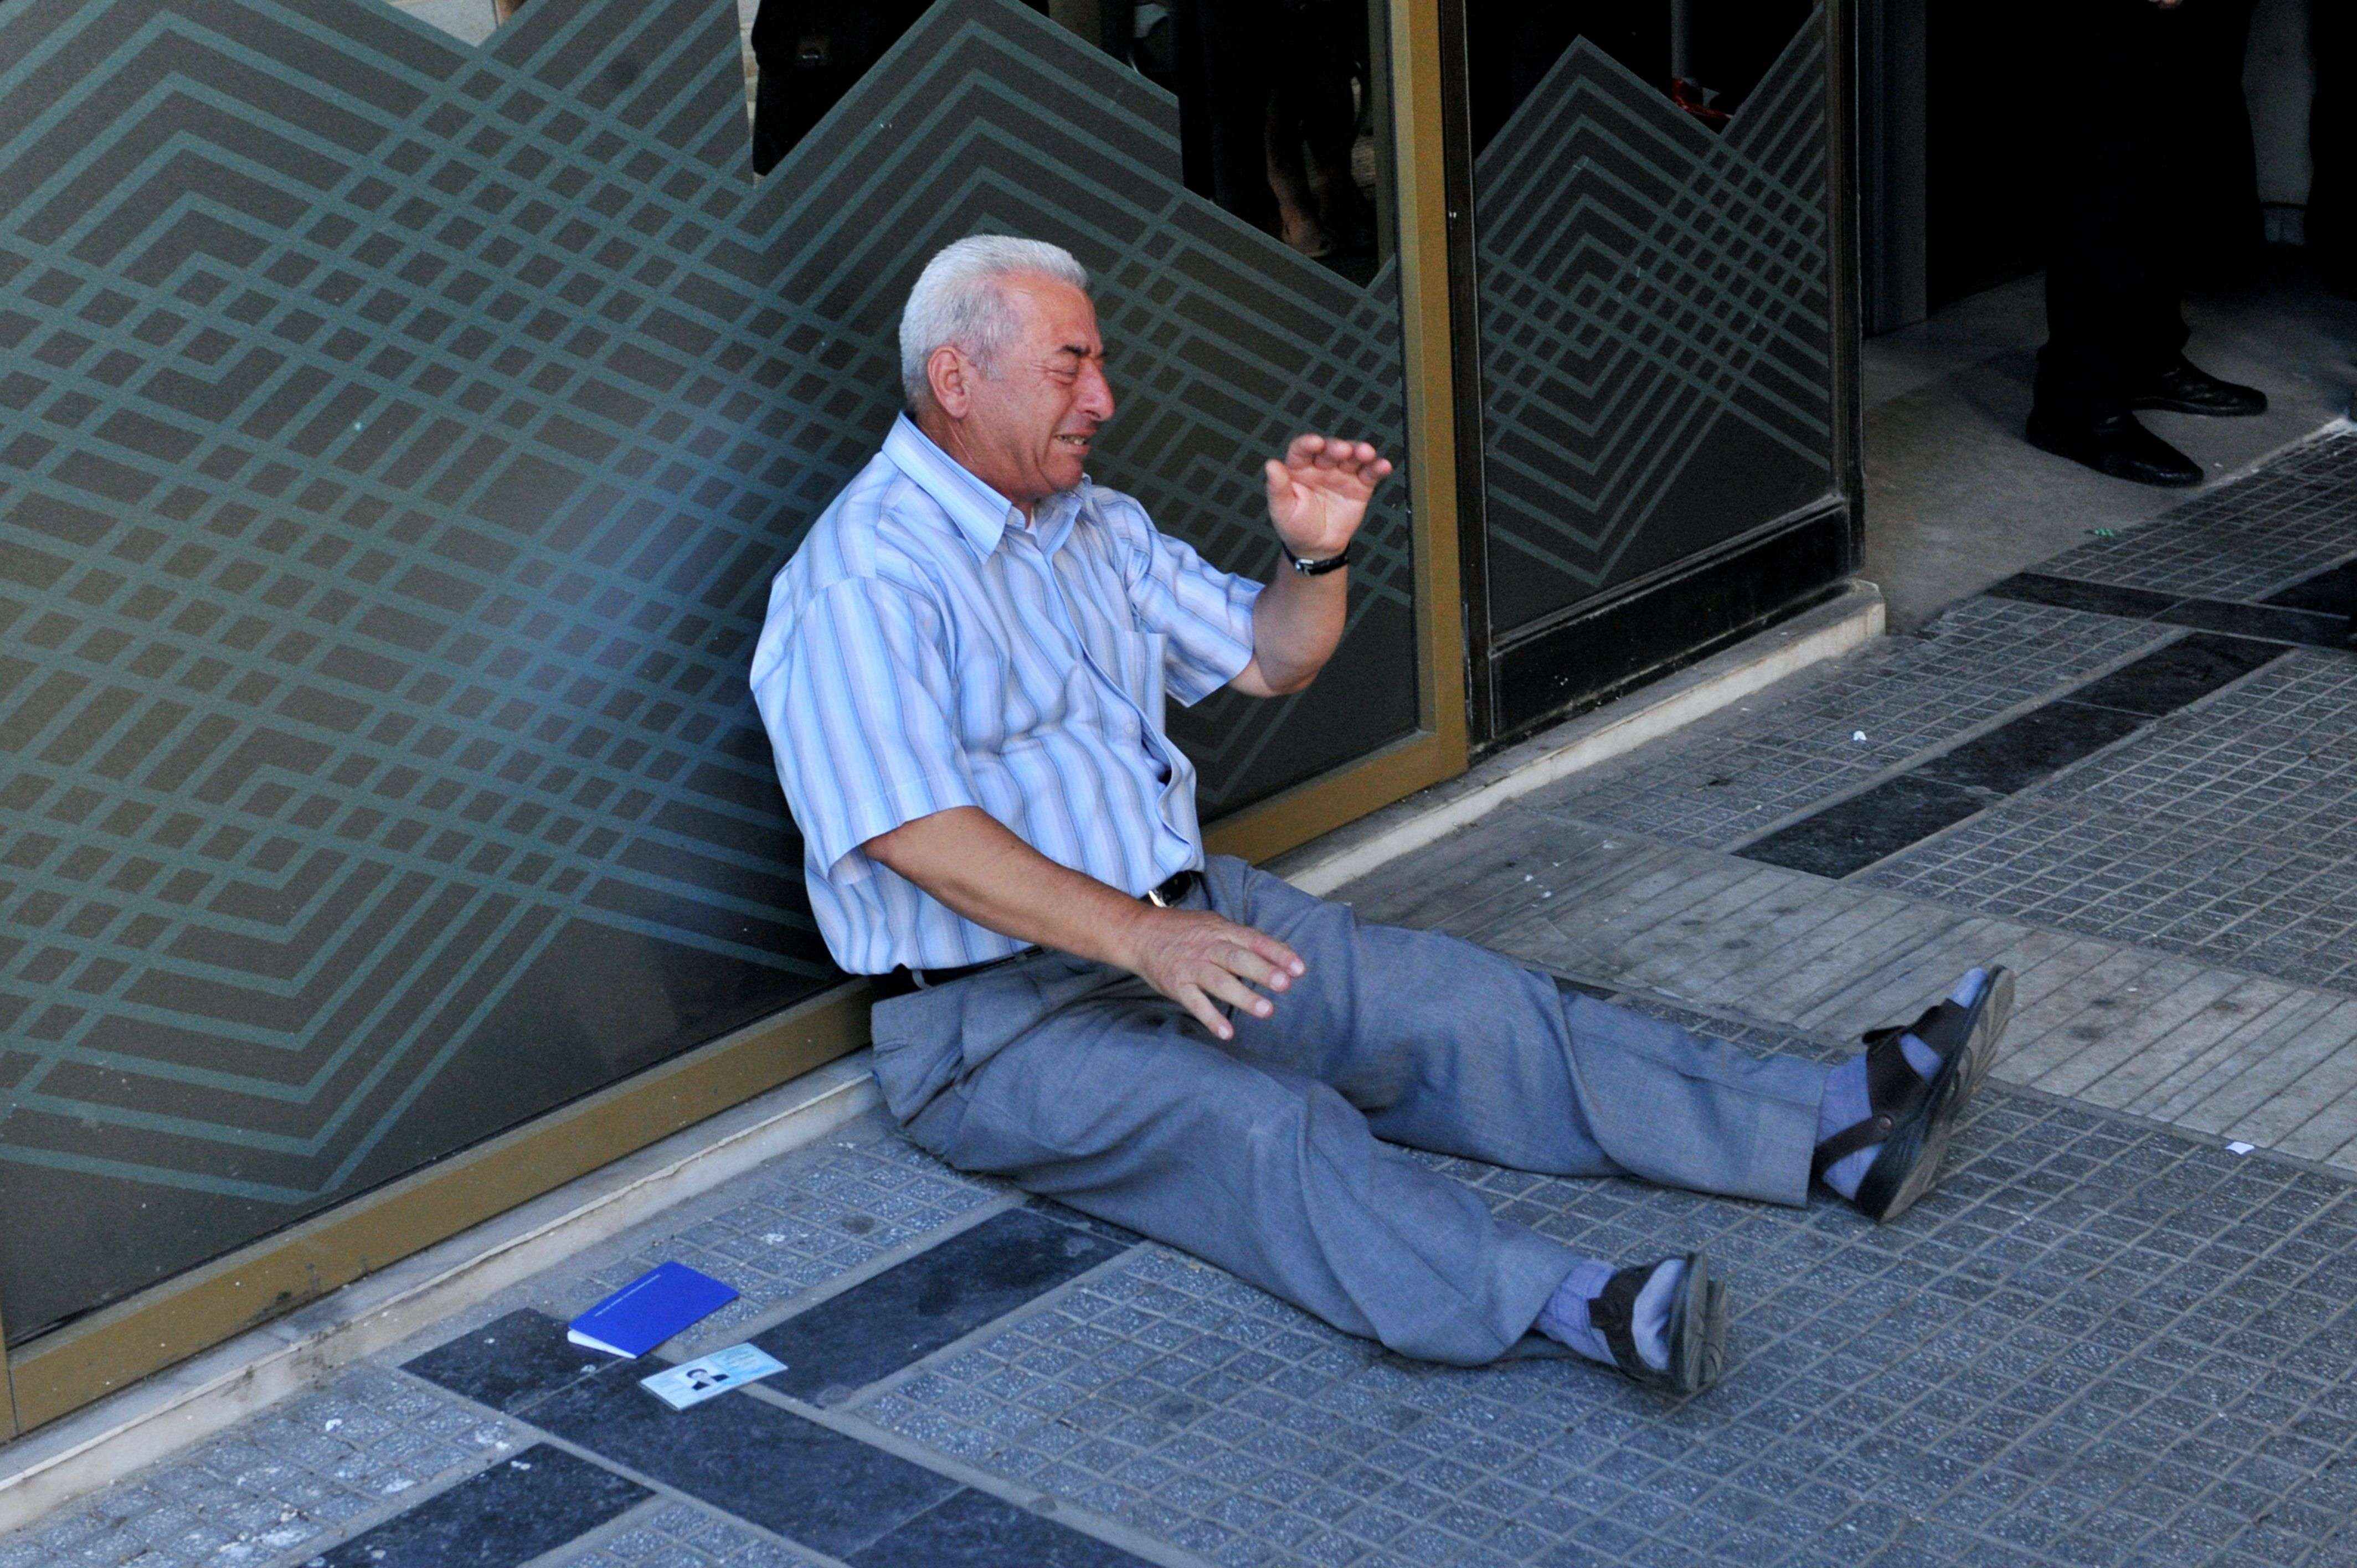 A distressed pensioner sits on the ground outside a national bank branch, as banks opened only for pensioners to allow them to withdraw their pensions, with a limit of 120 euros, in Thessaloniki. Greece is almost evenly split over a crucial weekend referendum that could decide its financial fate, with a 'Yes' result possibly ahead by a whisker, the latest survey Friday showed. Prime Minister Alexis Tsipras's government is asking Greece's voters to vote 'No' to a technically phrased question asking if they are willing to accept more tough austerity conditions from international creditors in exchange for bailout funds. (AFP PHOTO /SAKIS MITROLIDIS)